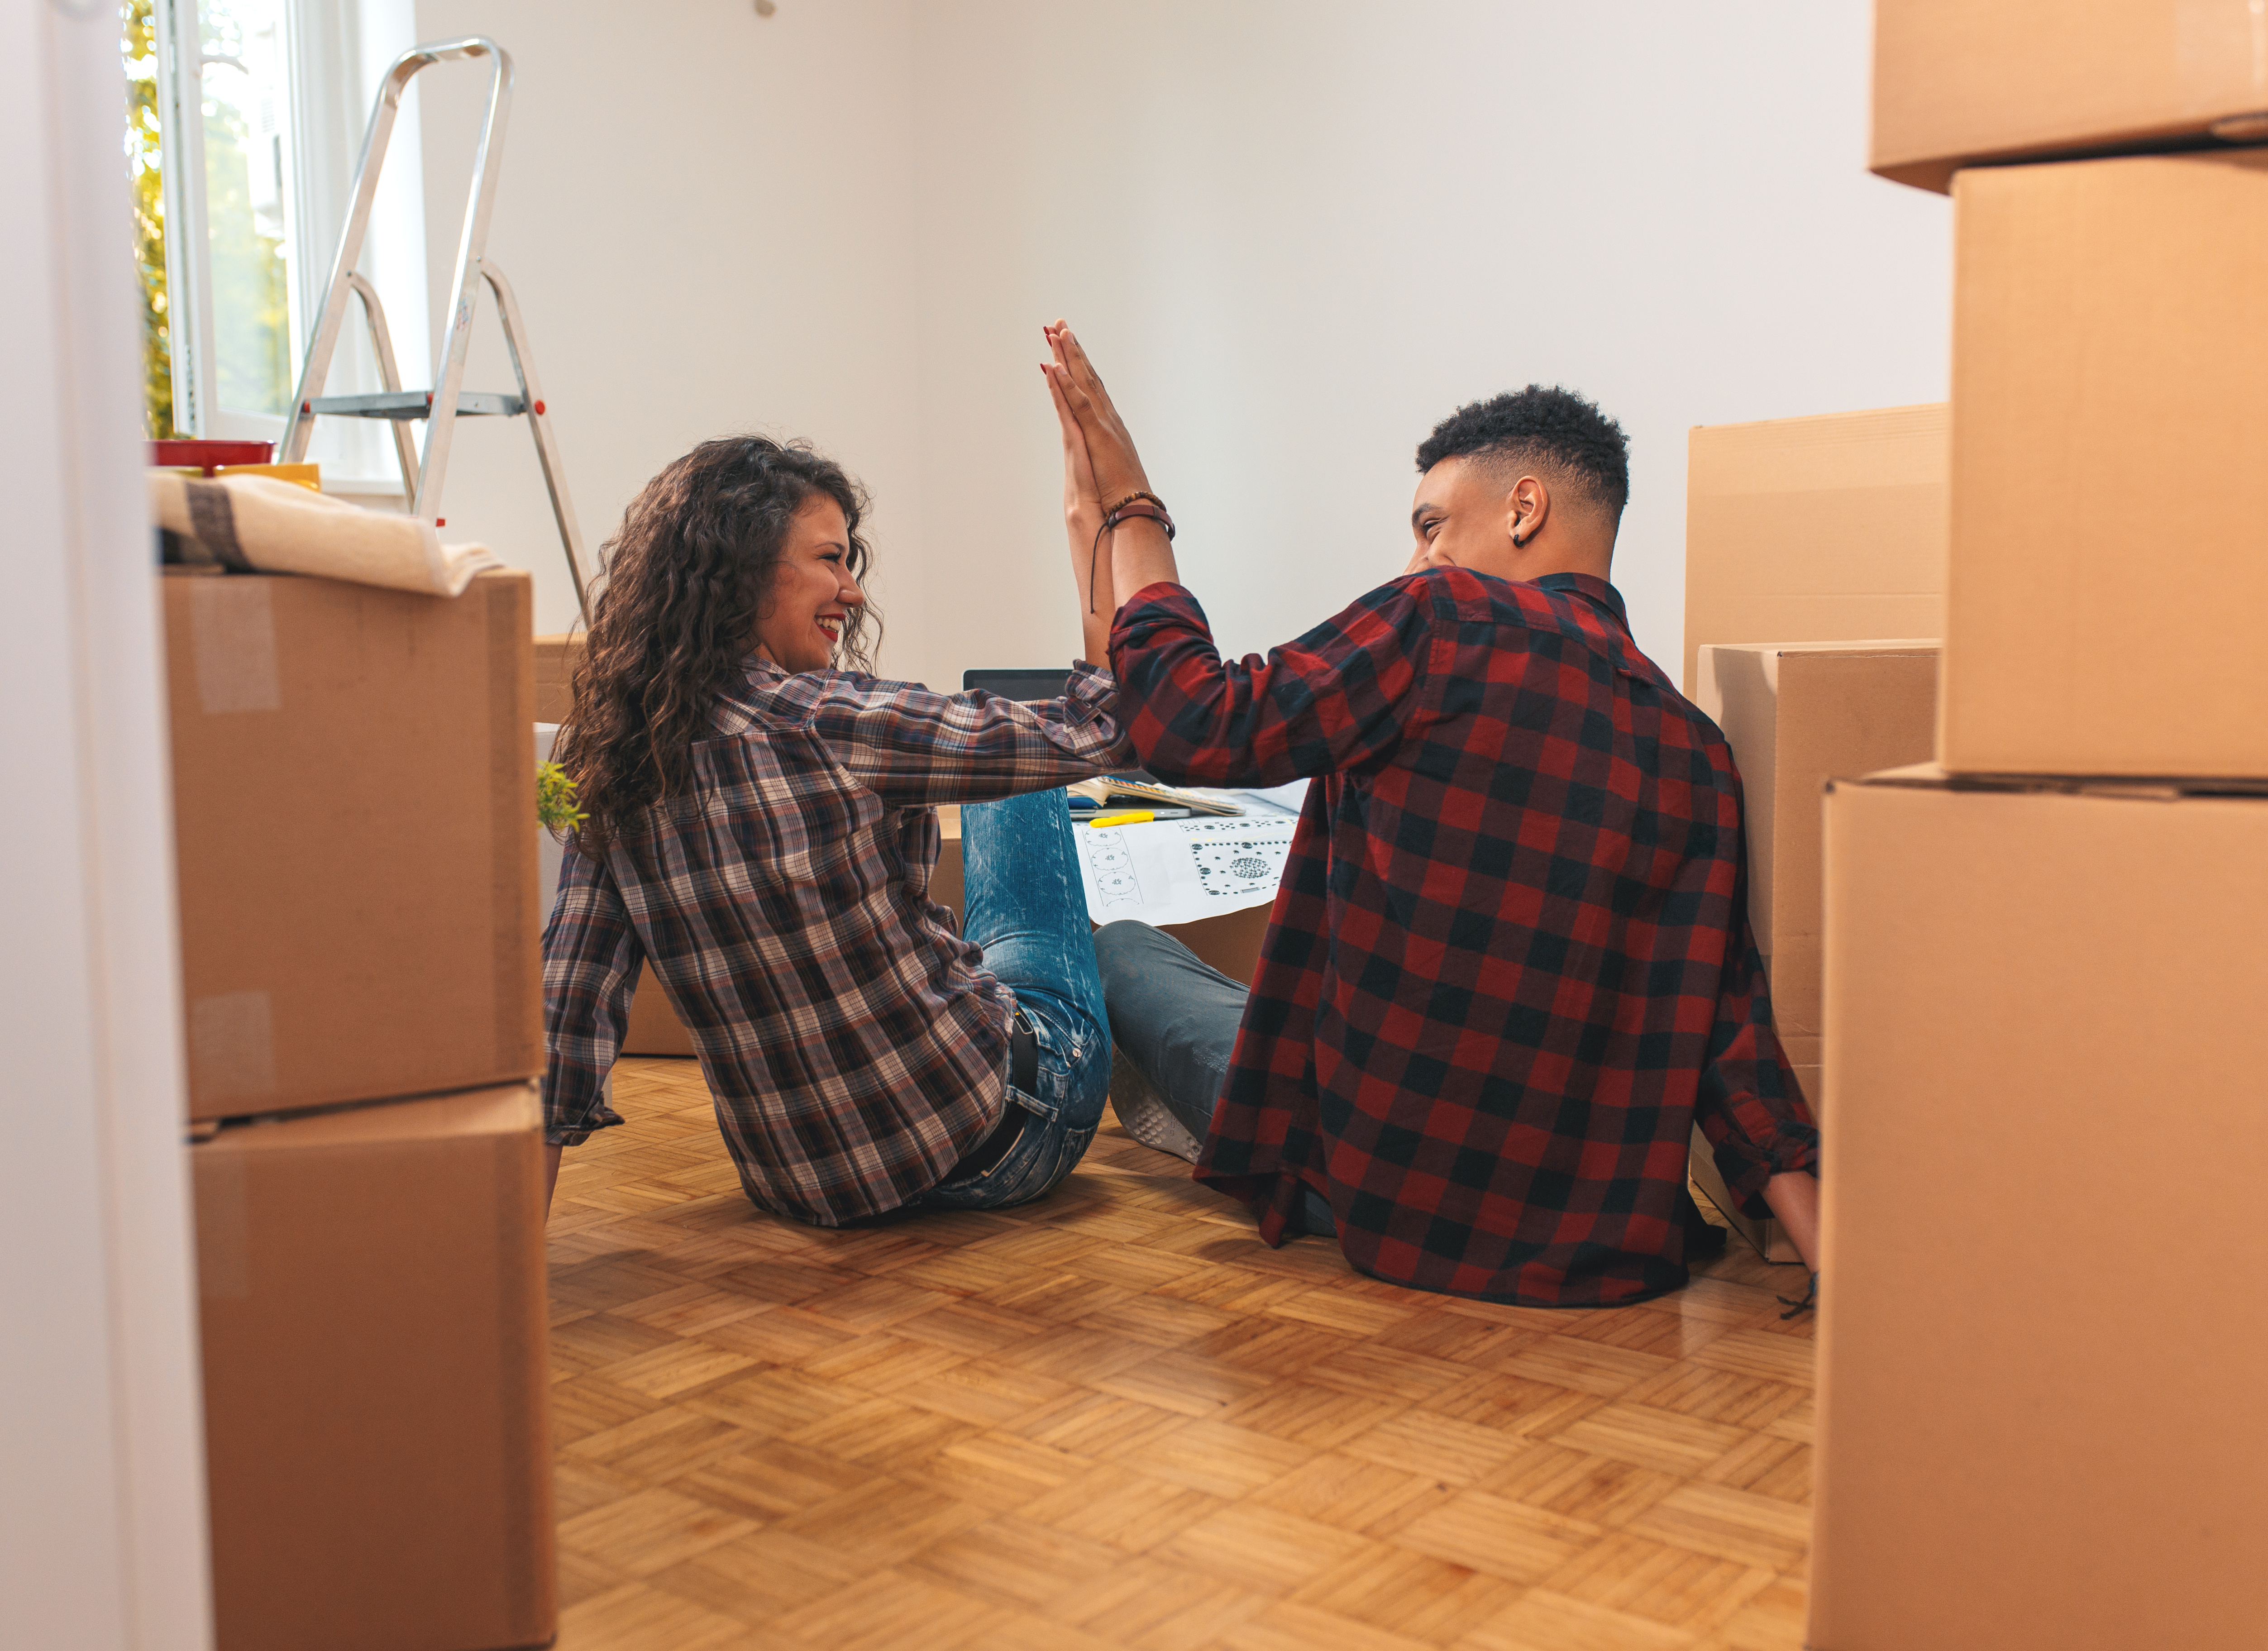 Man and woman high-fiving in the middle of moving boxes